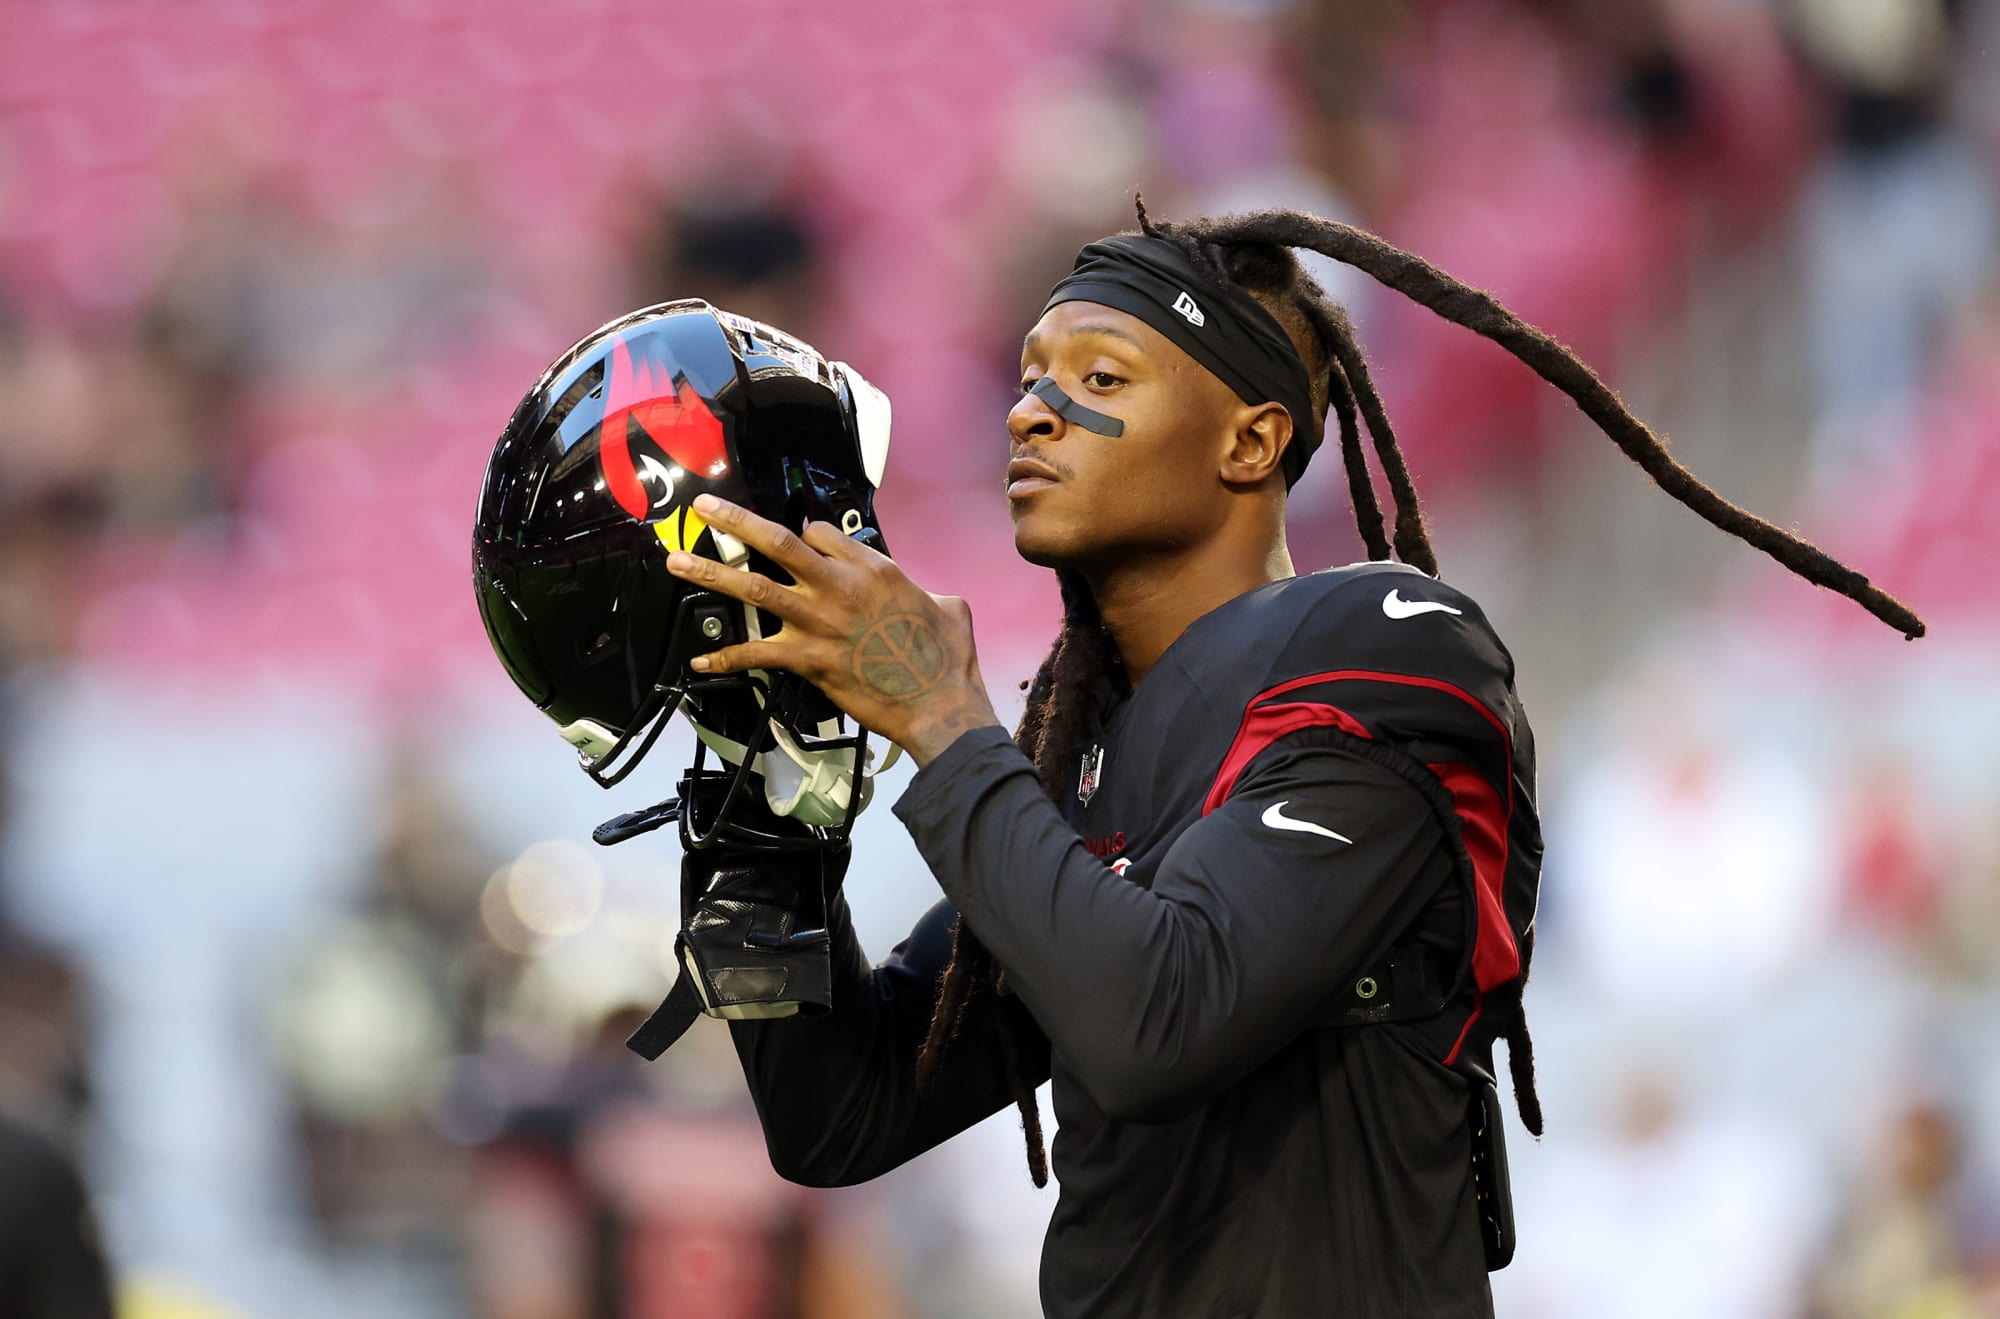 DeAndre Hopkins spilled the beans on where he wants to be traded